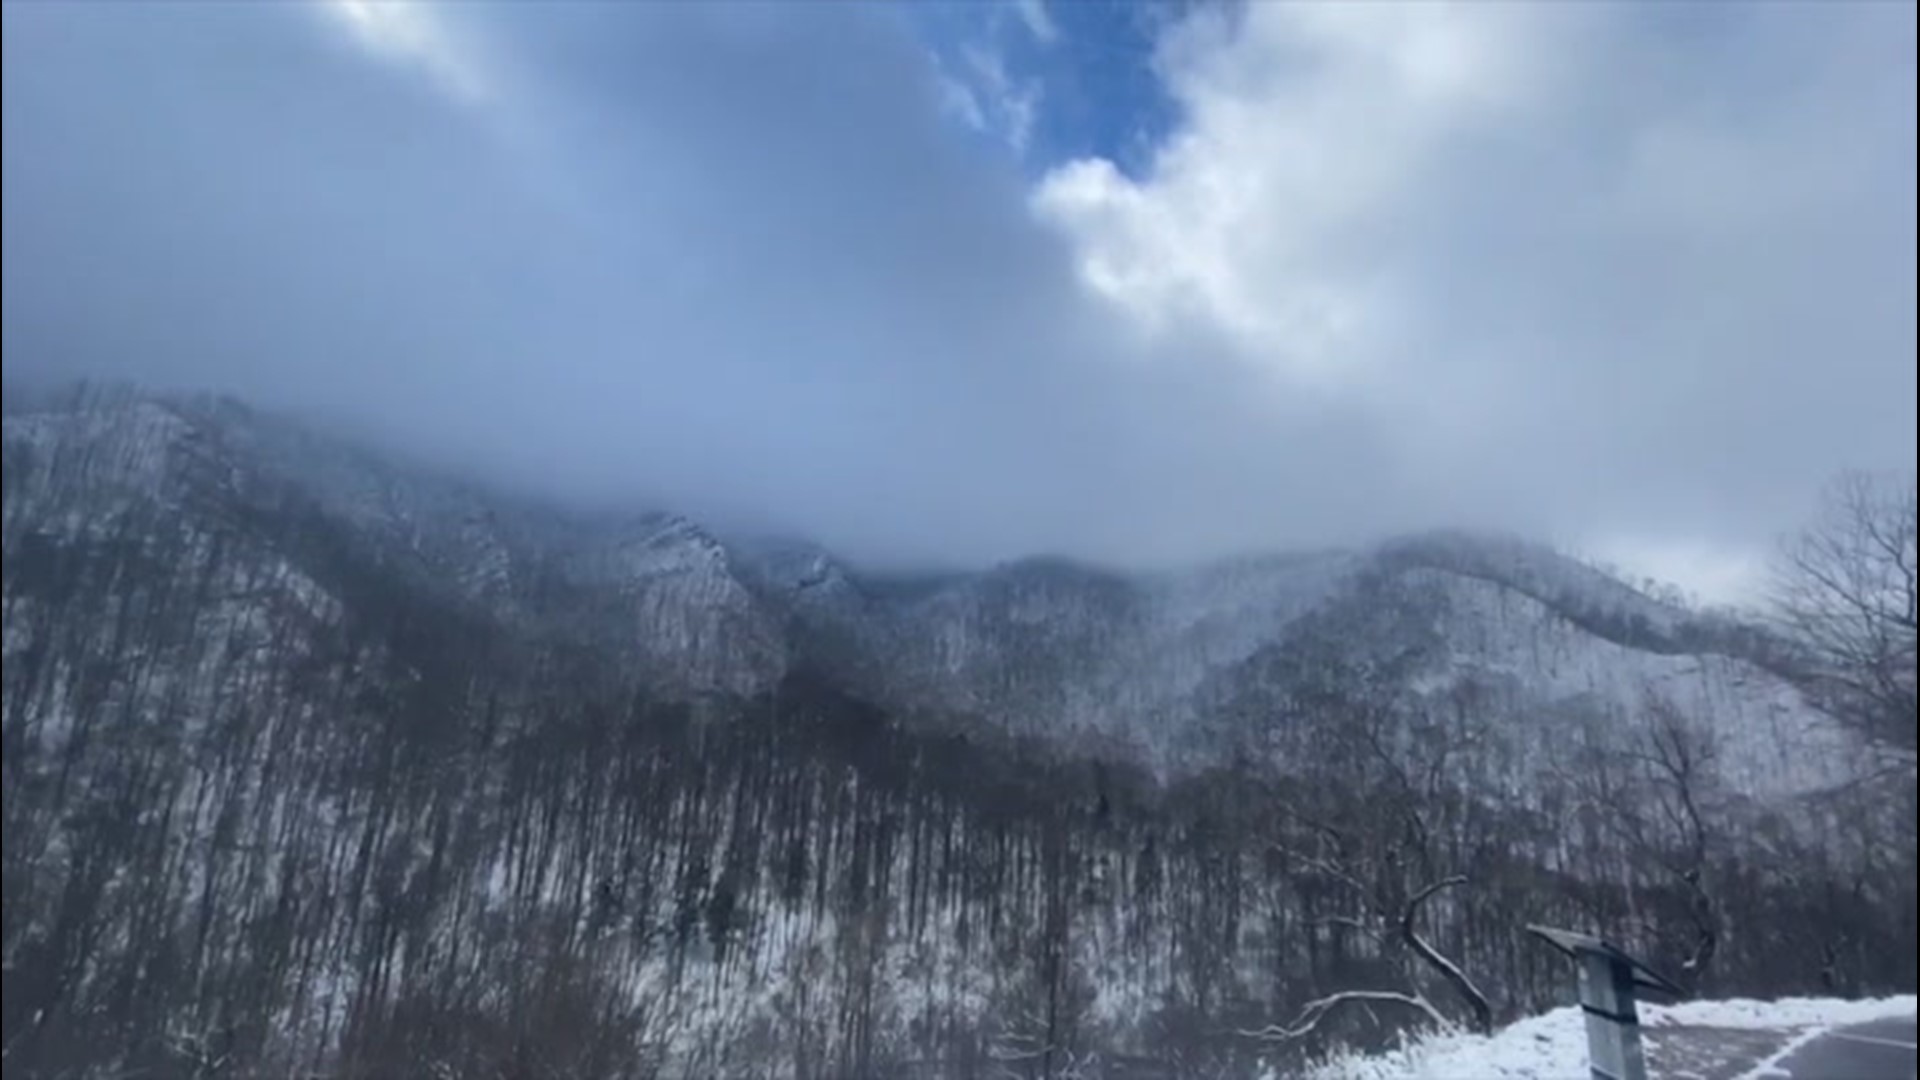 Extreme Meteorologist Reed Timmer was in Great Smoky Mountains National Park in Tennessee that was hit with strong winds and snow overnight.